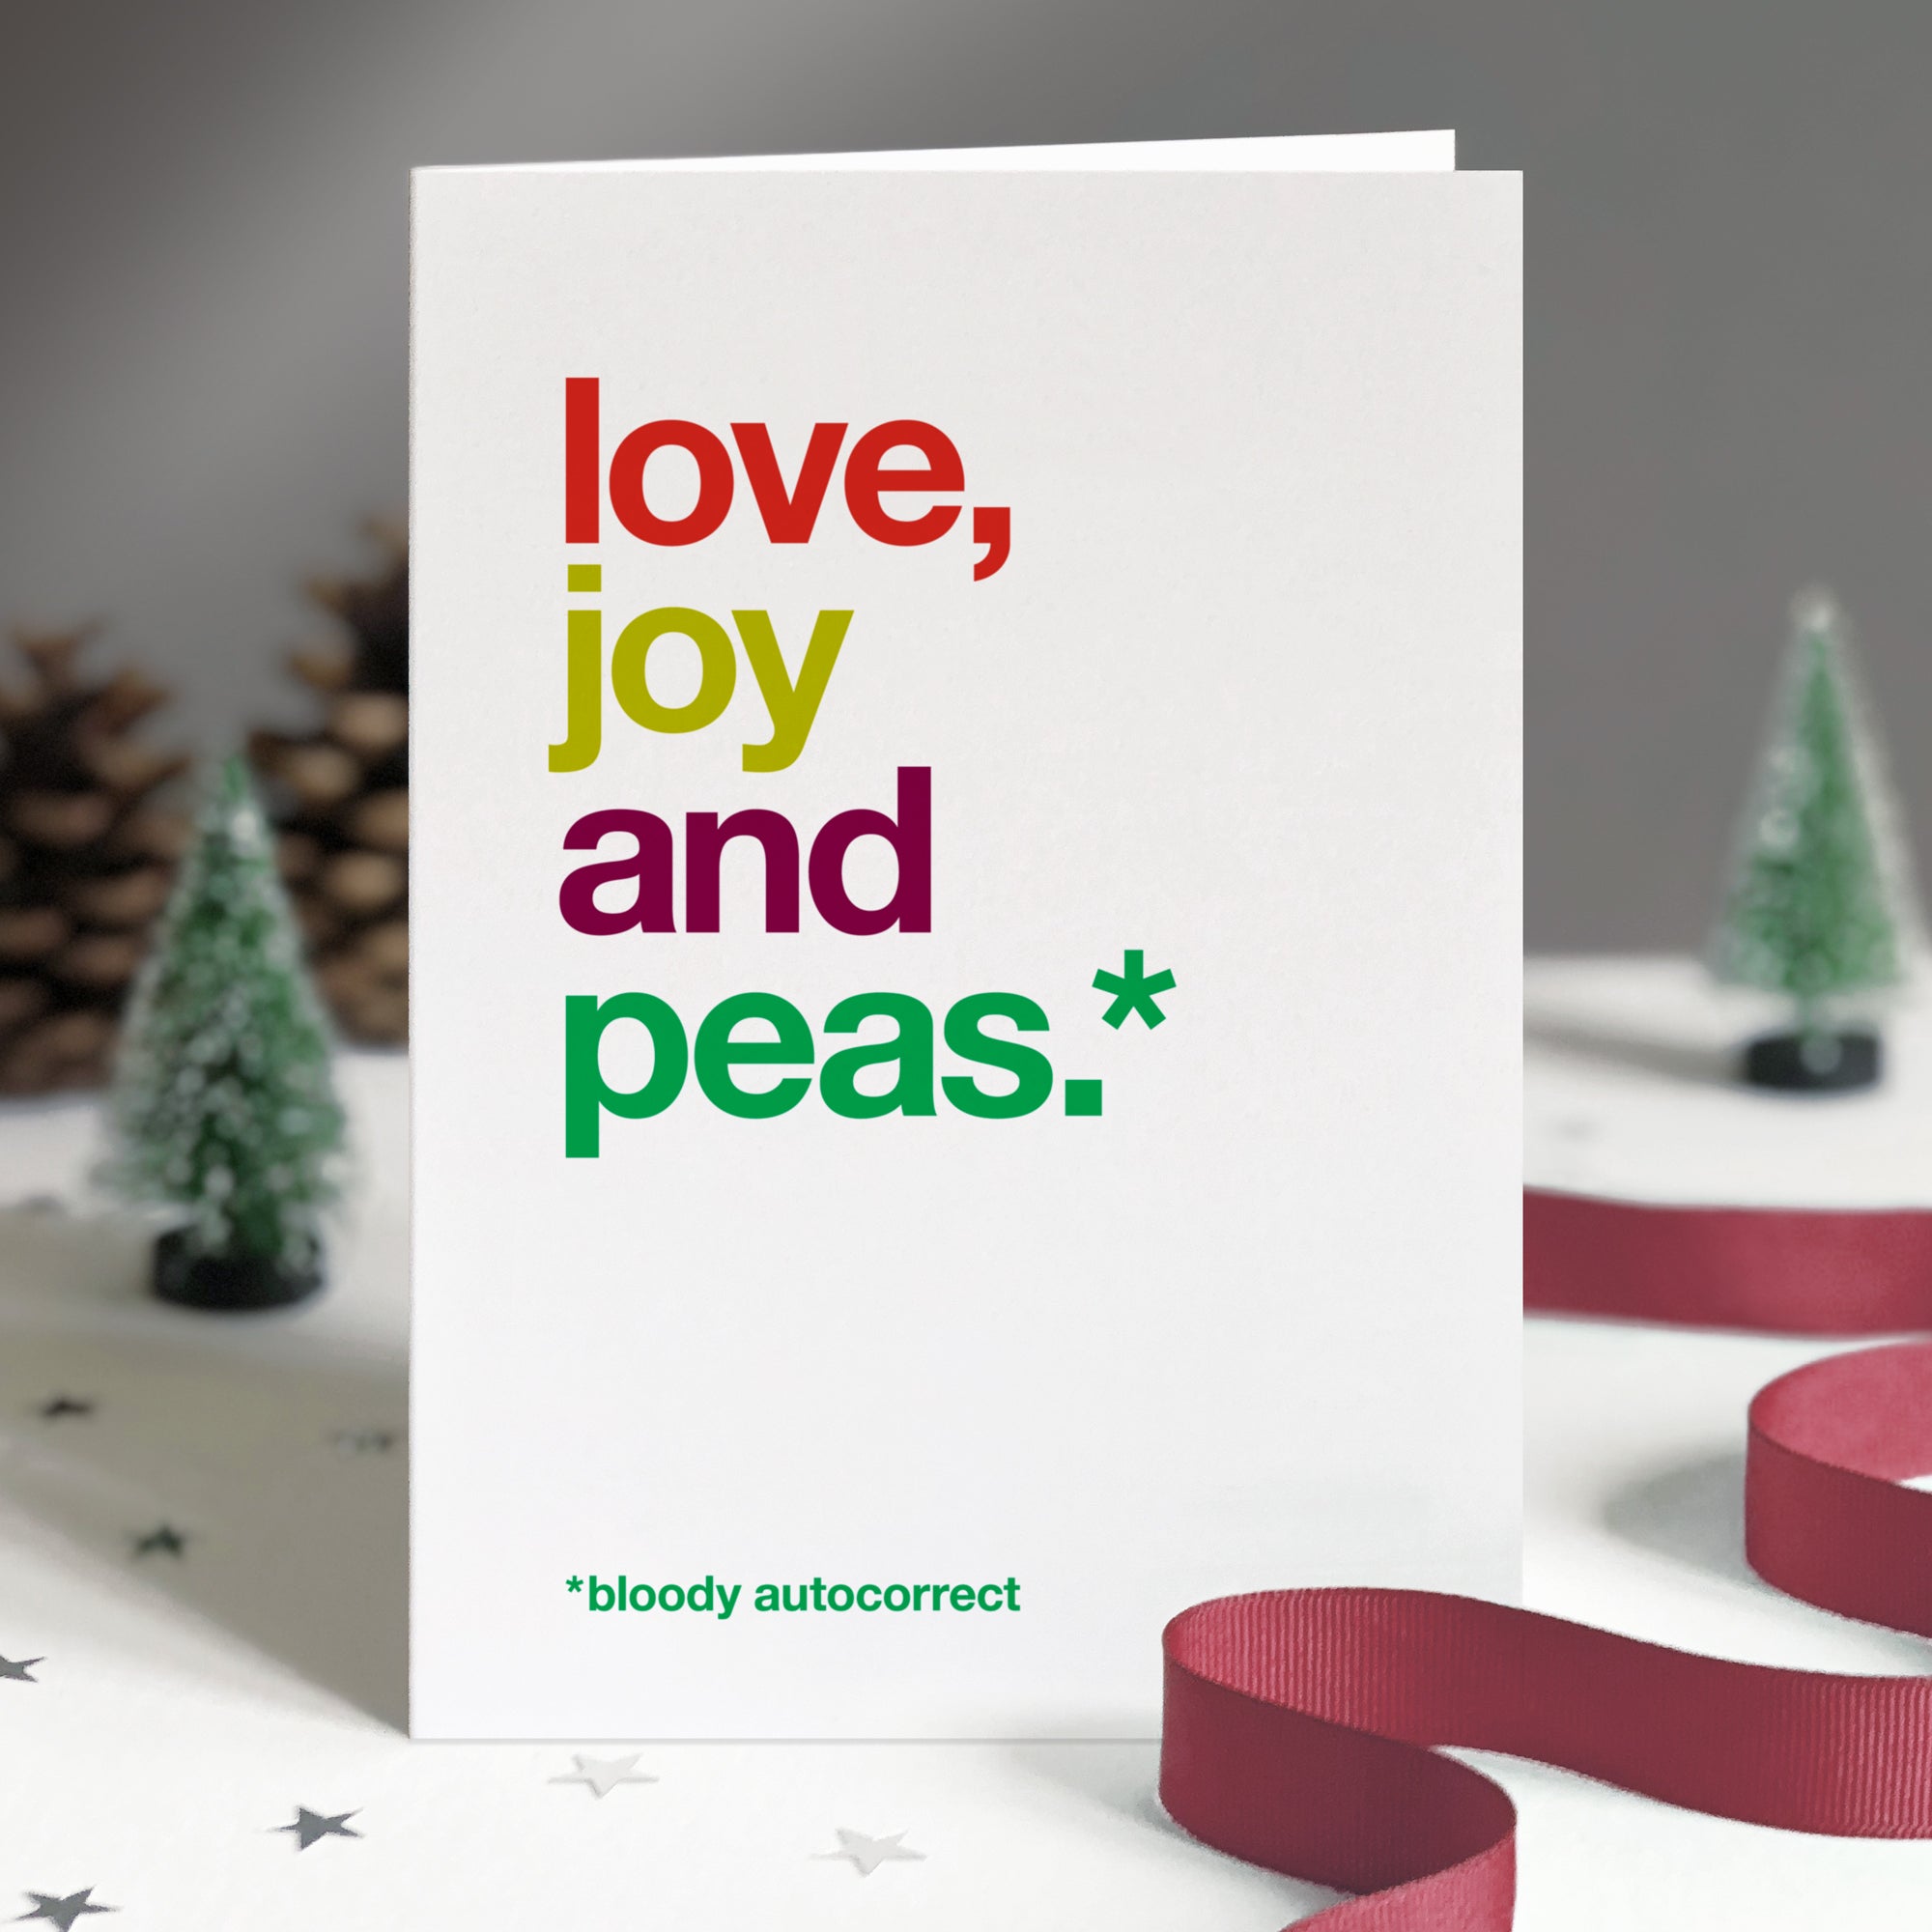 Funny christmas card autocorrected to 'love, joy and peas'.